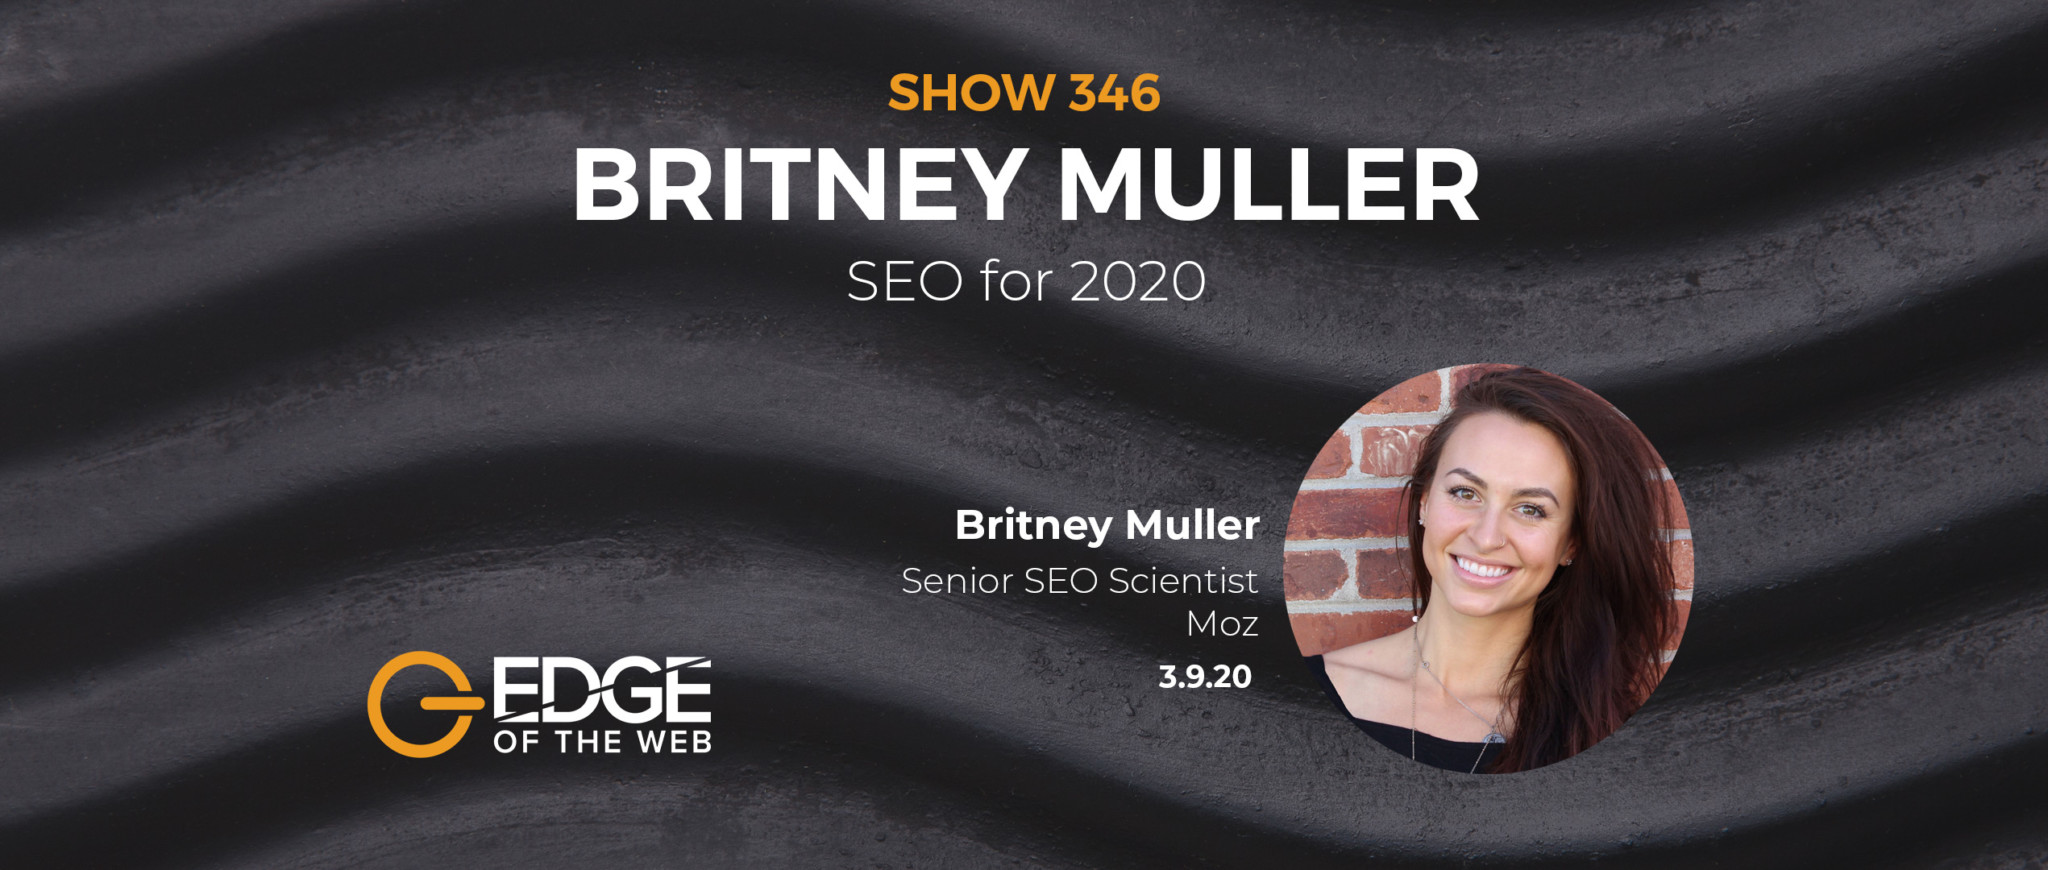 EP 346: SEO for 2020 with Britney Muller